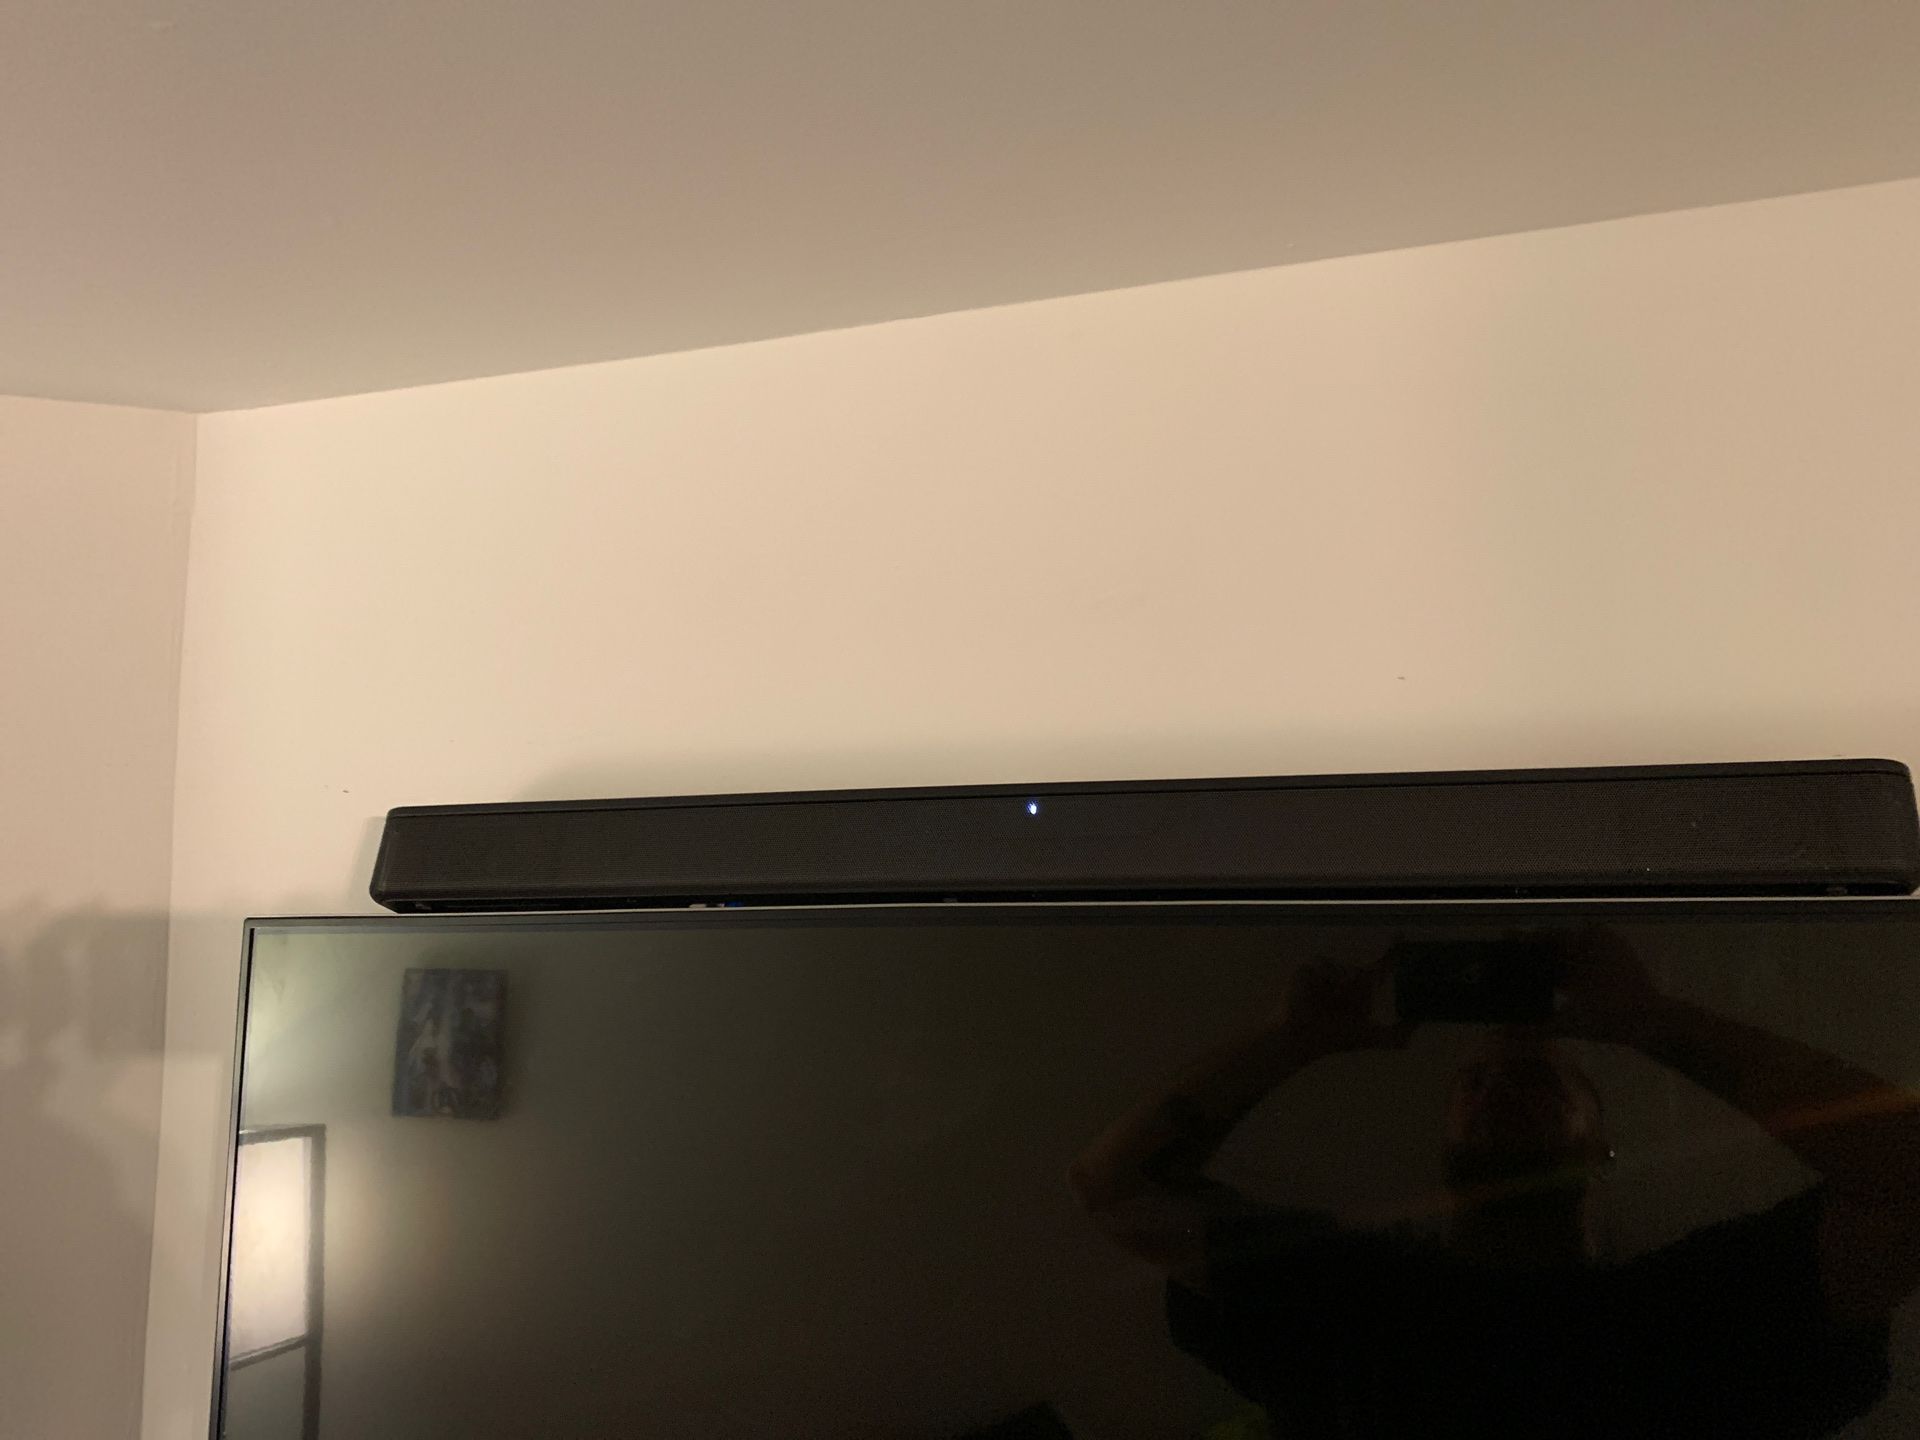 Sony Sound Bar and Wireless Bluetooth Subwoofer